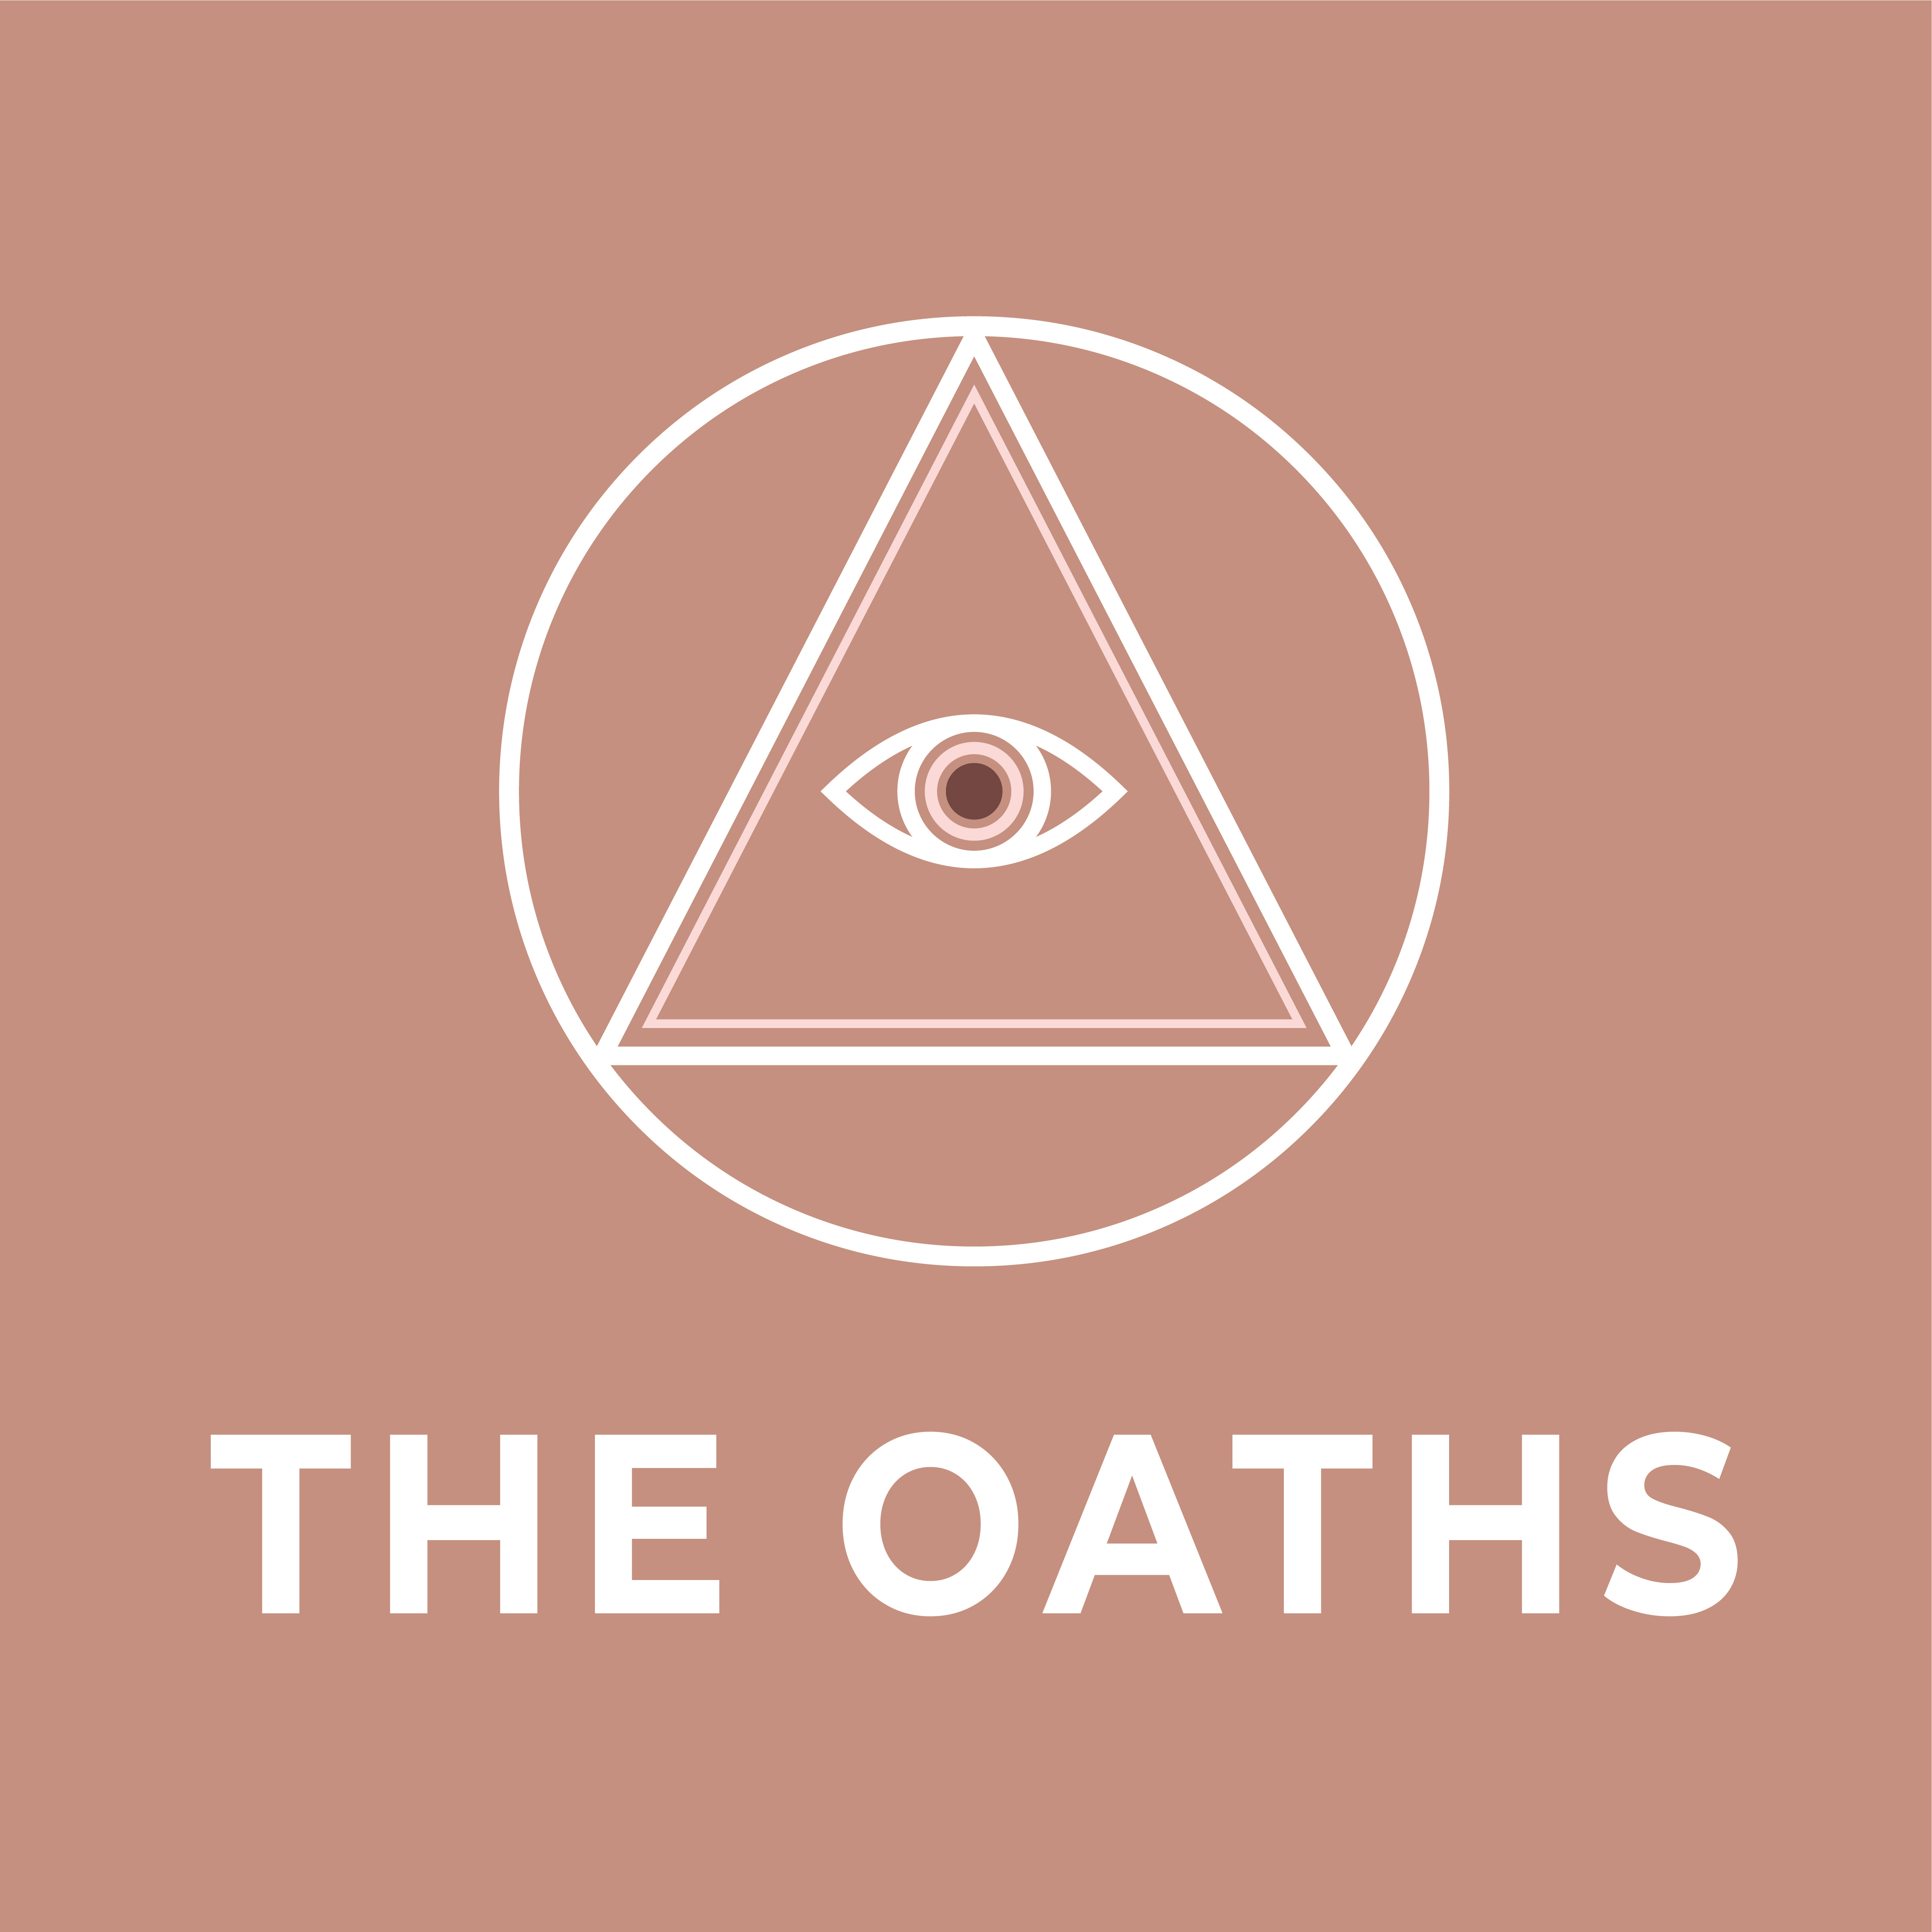 Conoce a The Oaths.